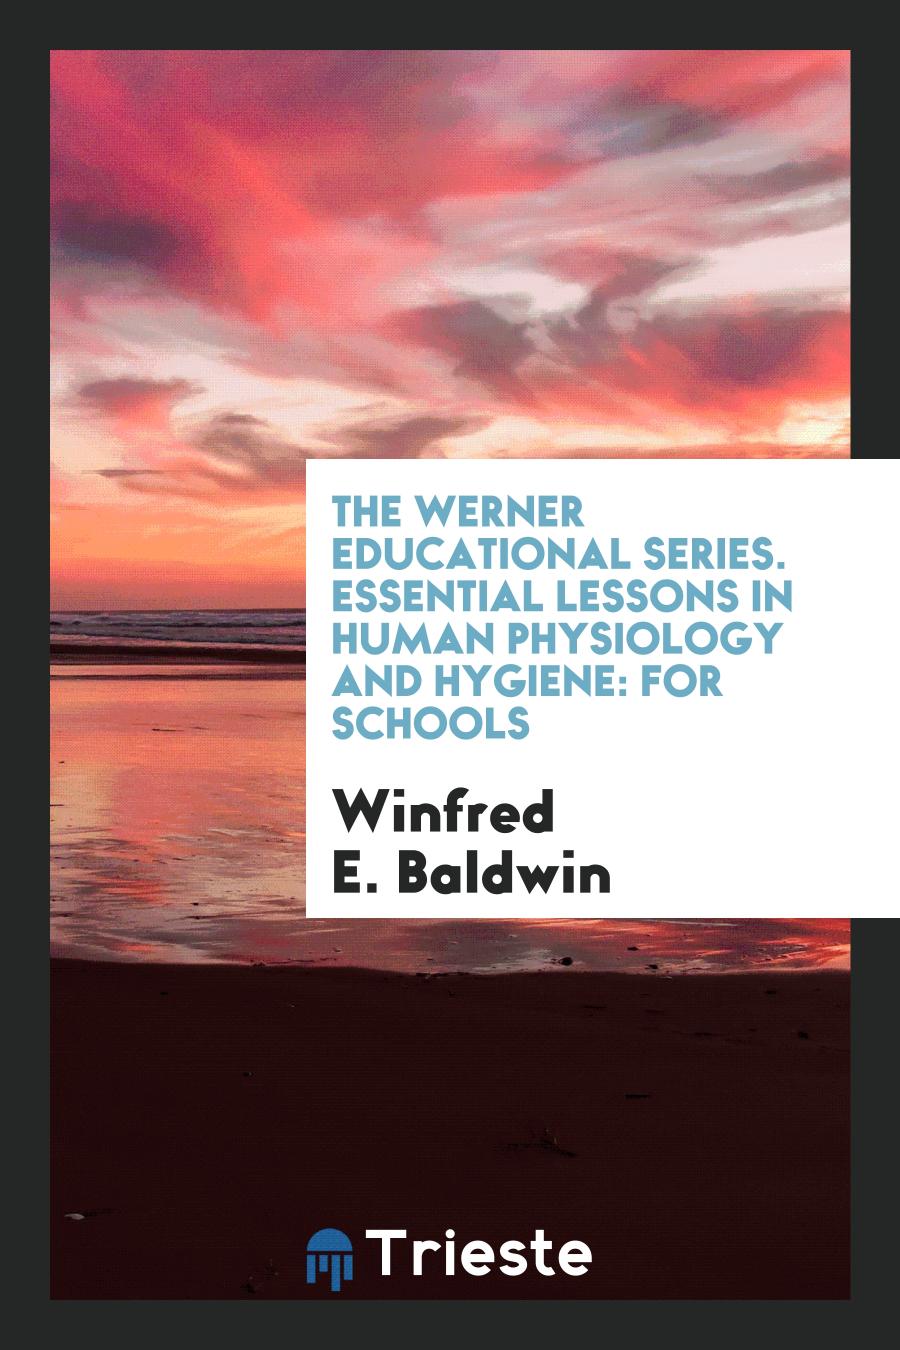 Winfred E. Baldwin - The Werner Educational Series. Essential Lessons in Human Physiology and Hygiene: For Schools